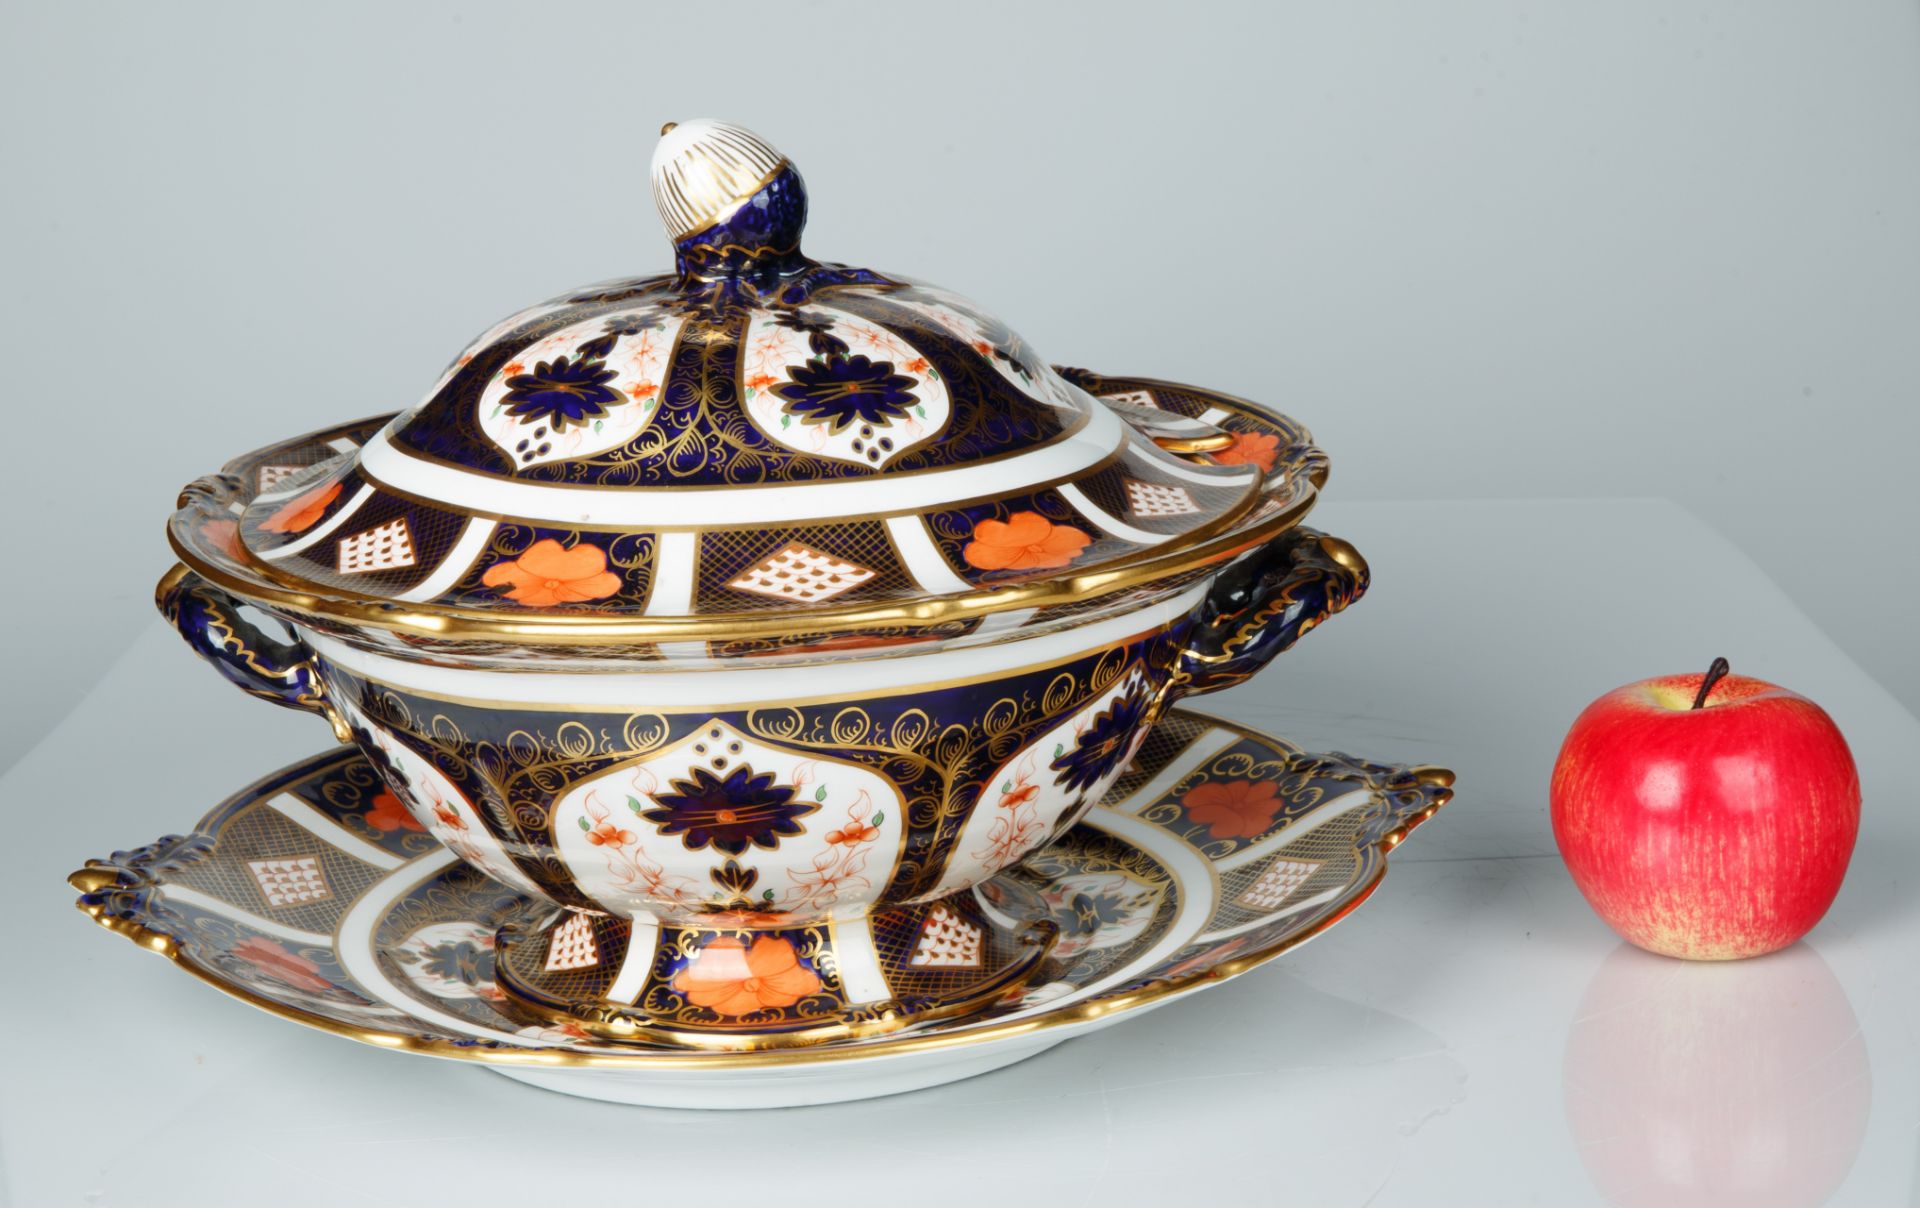 A ROYAL CROWN DERBY PORCELAIN COVERED DISH AND PLATTER IN TRADITIONAL IMARI PATTERN, CIRCA 1921-1965 - Image 8 of 8